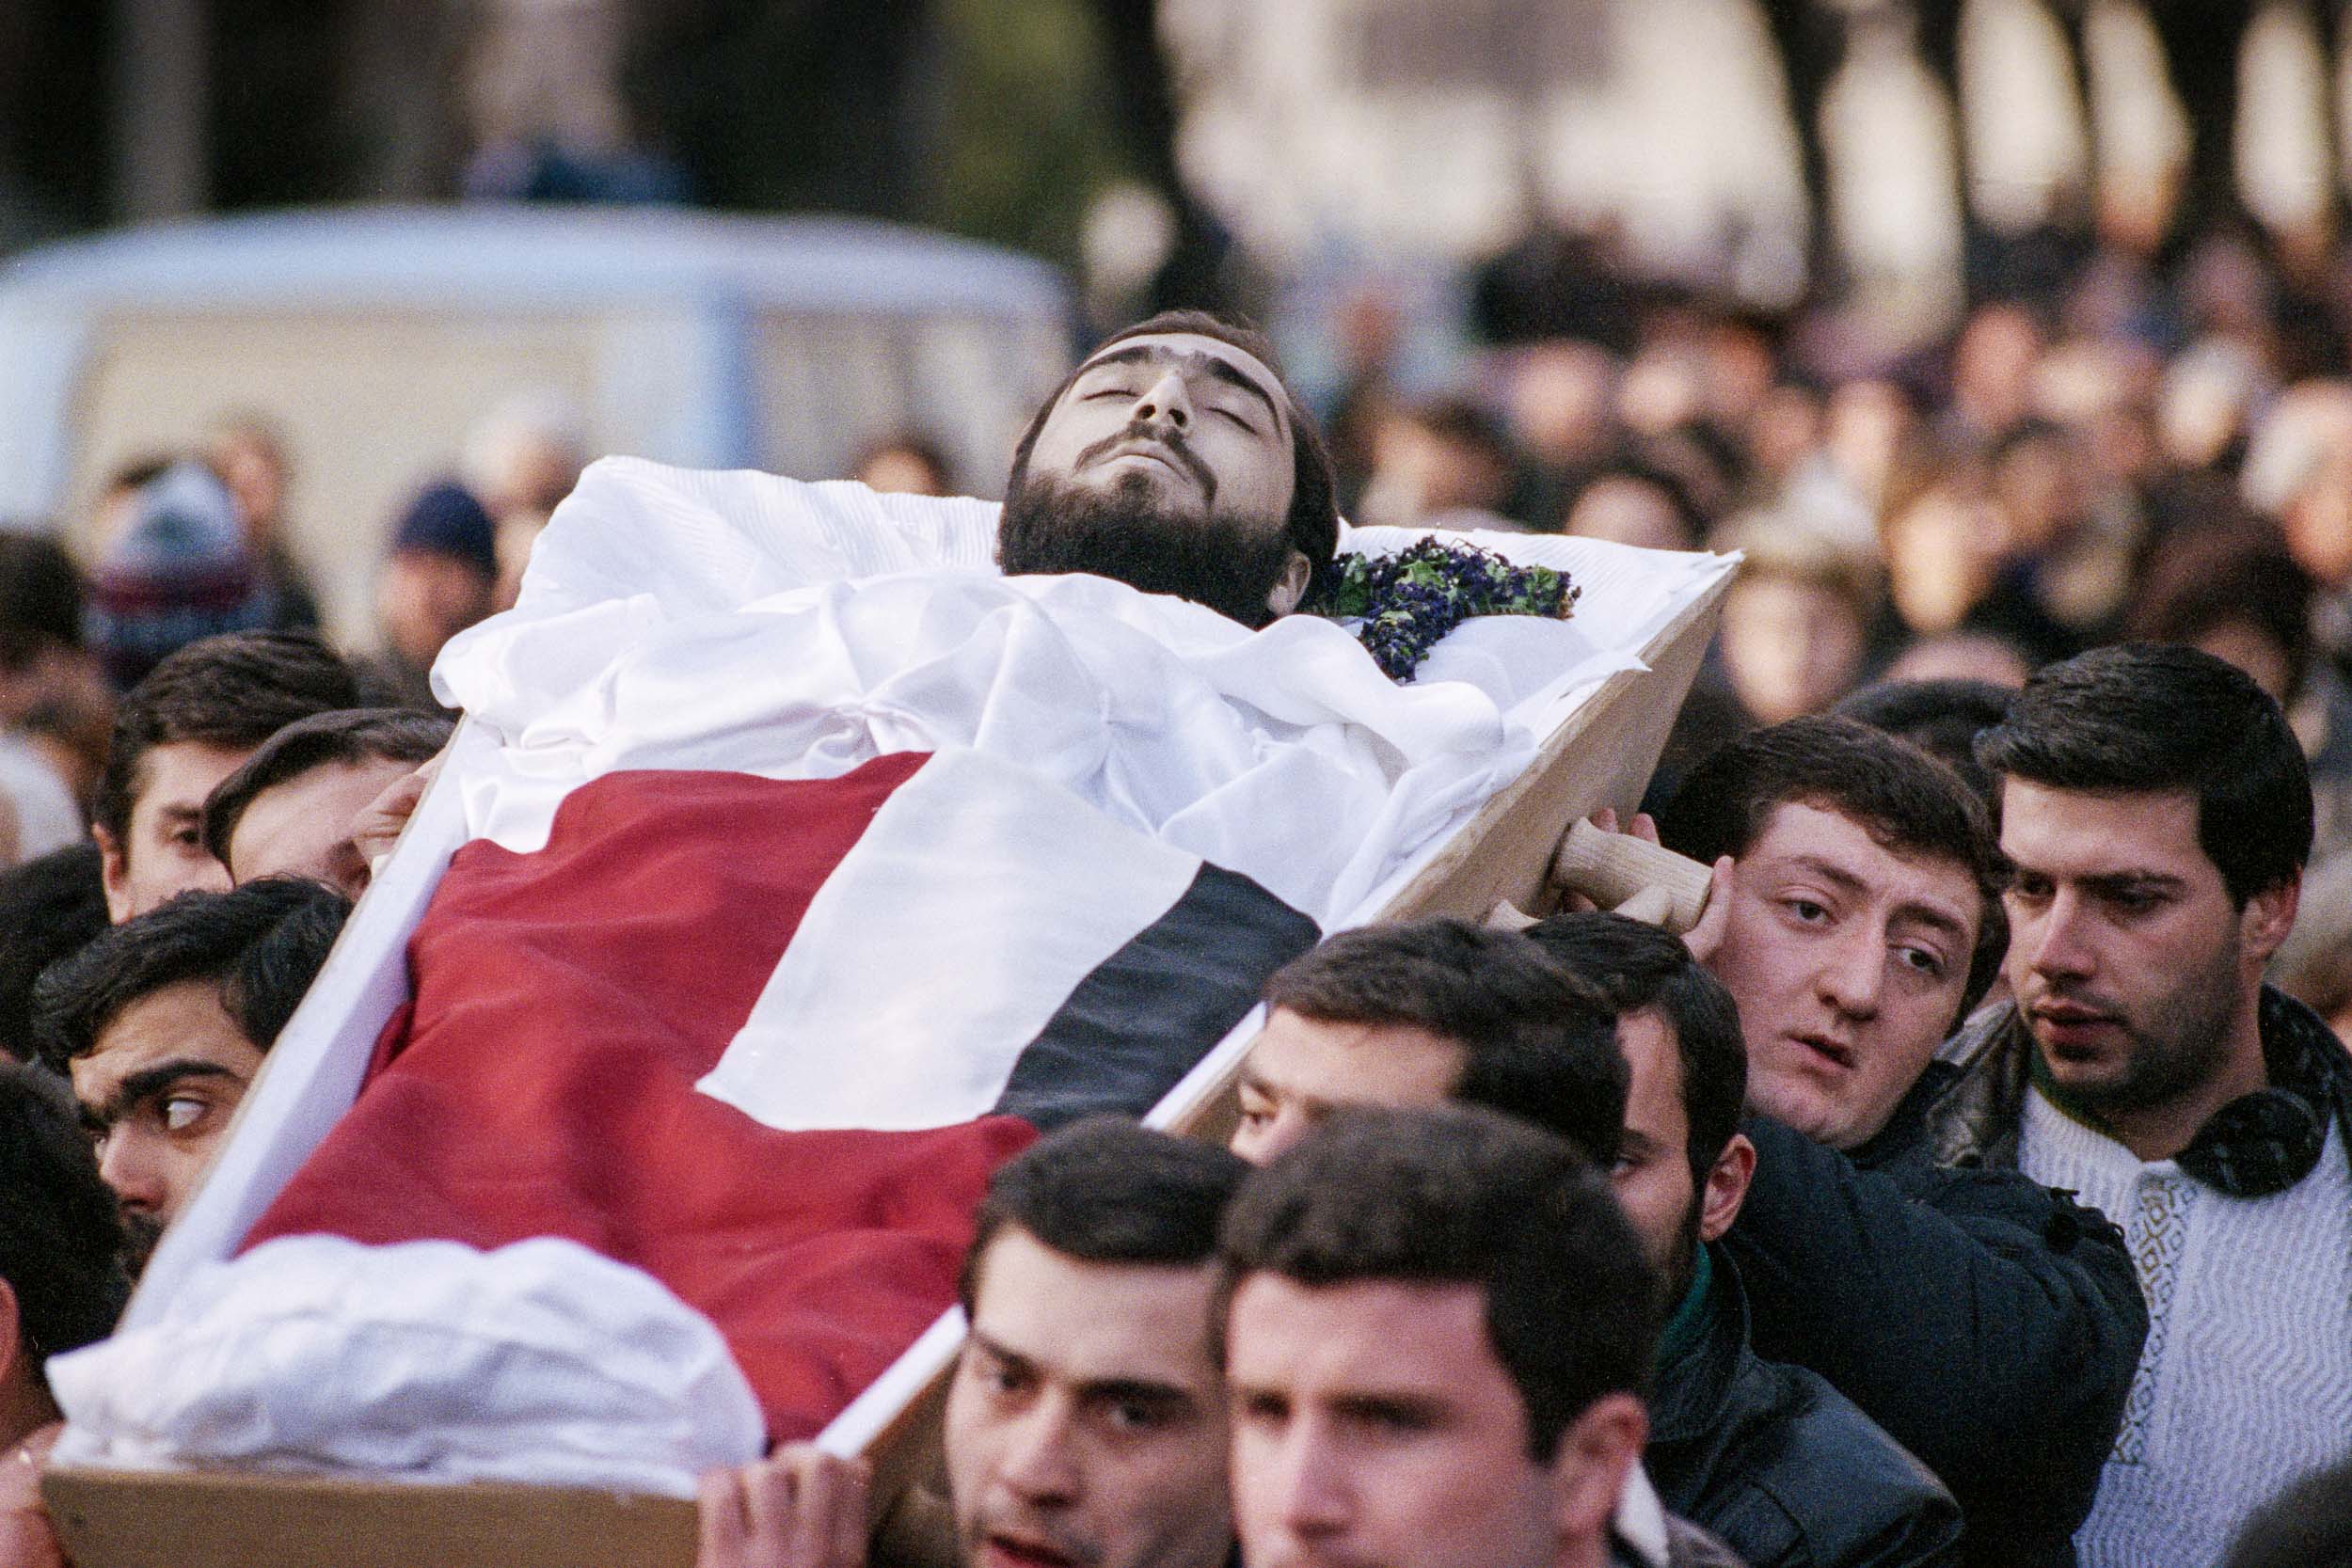 Pall bearers carry the body of  Levan Tactakichvili through the streets in a funeral procession to the cemetery for his burial, Tbilisi, Georgia